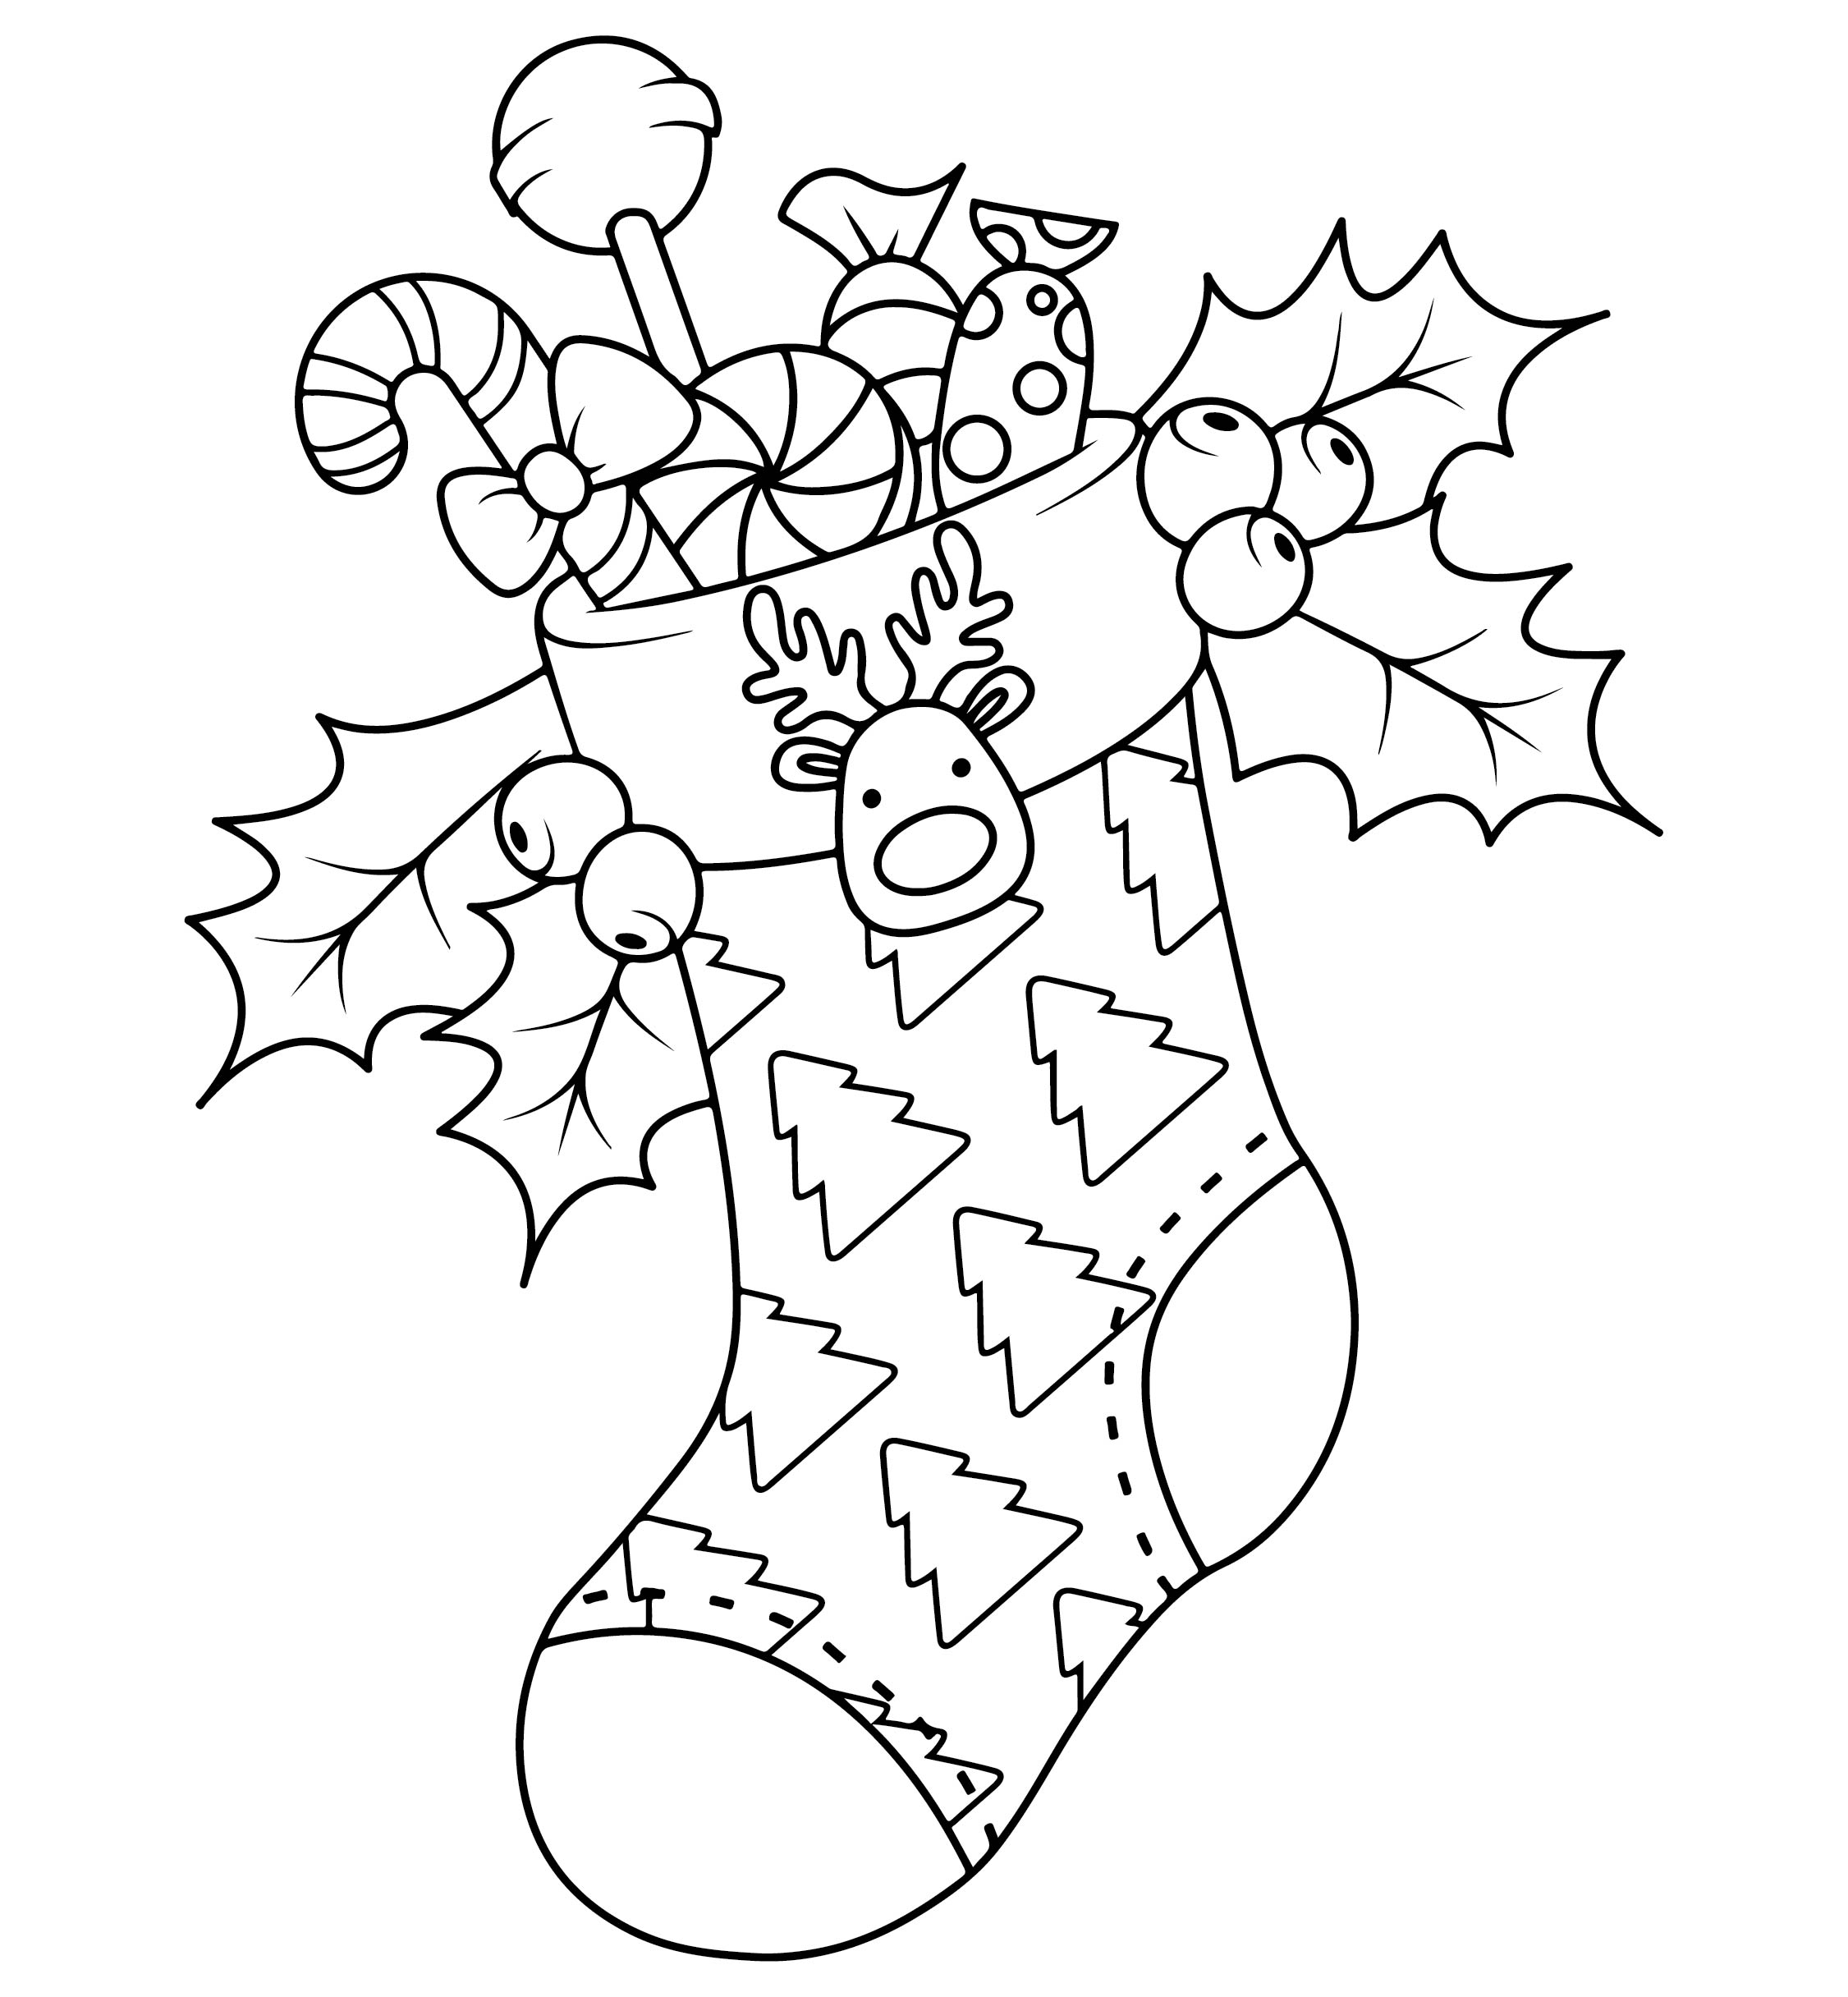 31  Christmas Stocking Coloring Pages AtlantaDerry